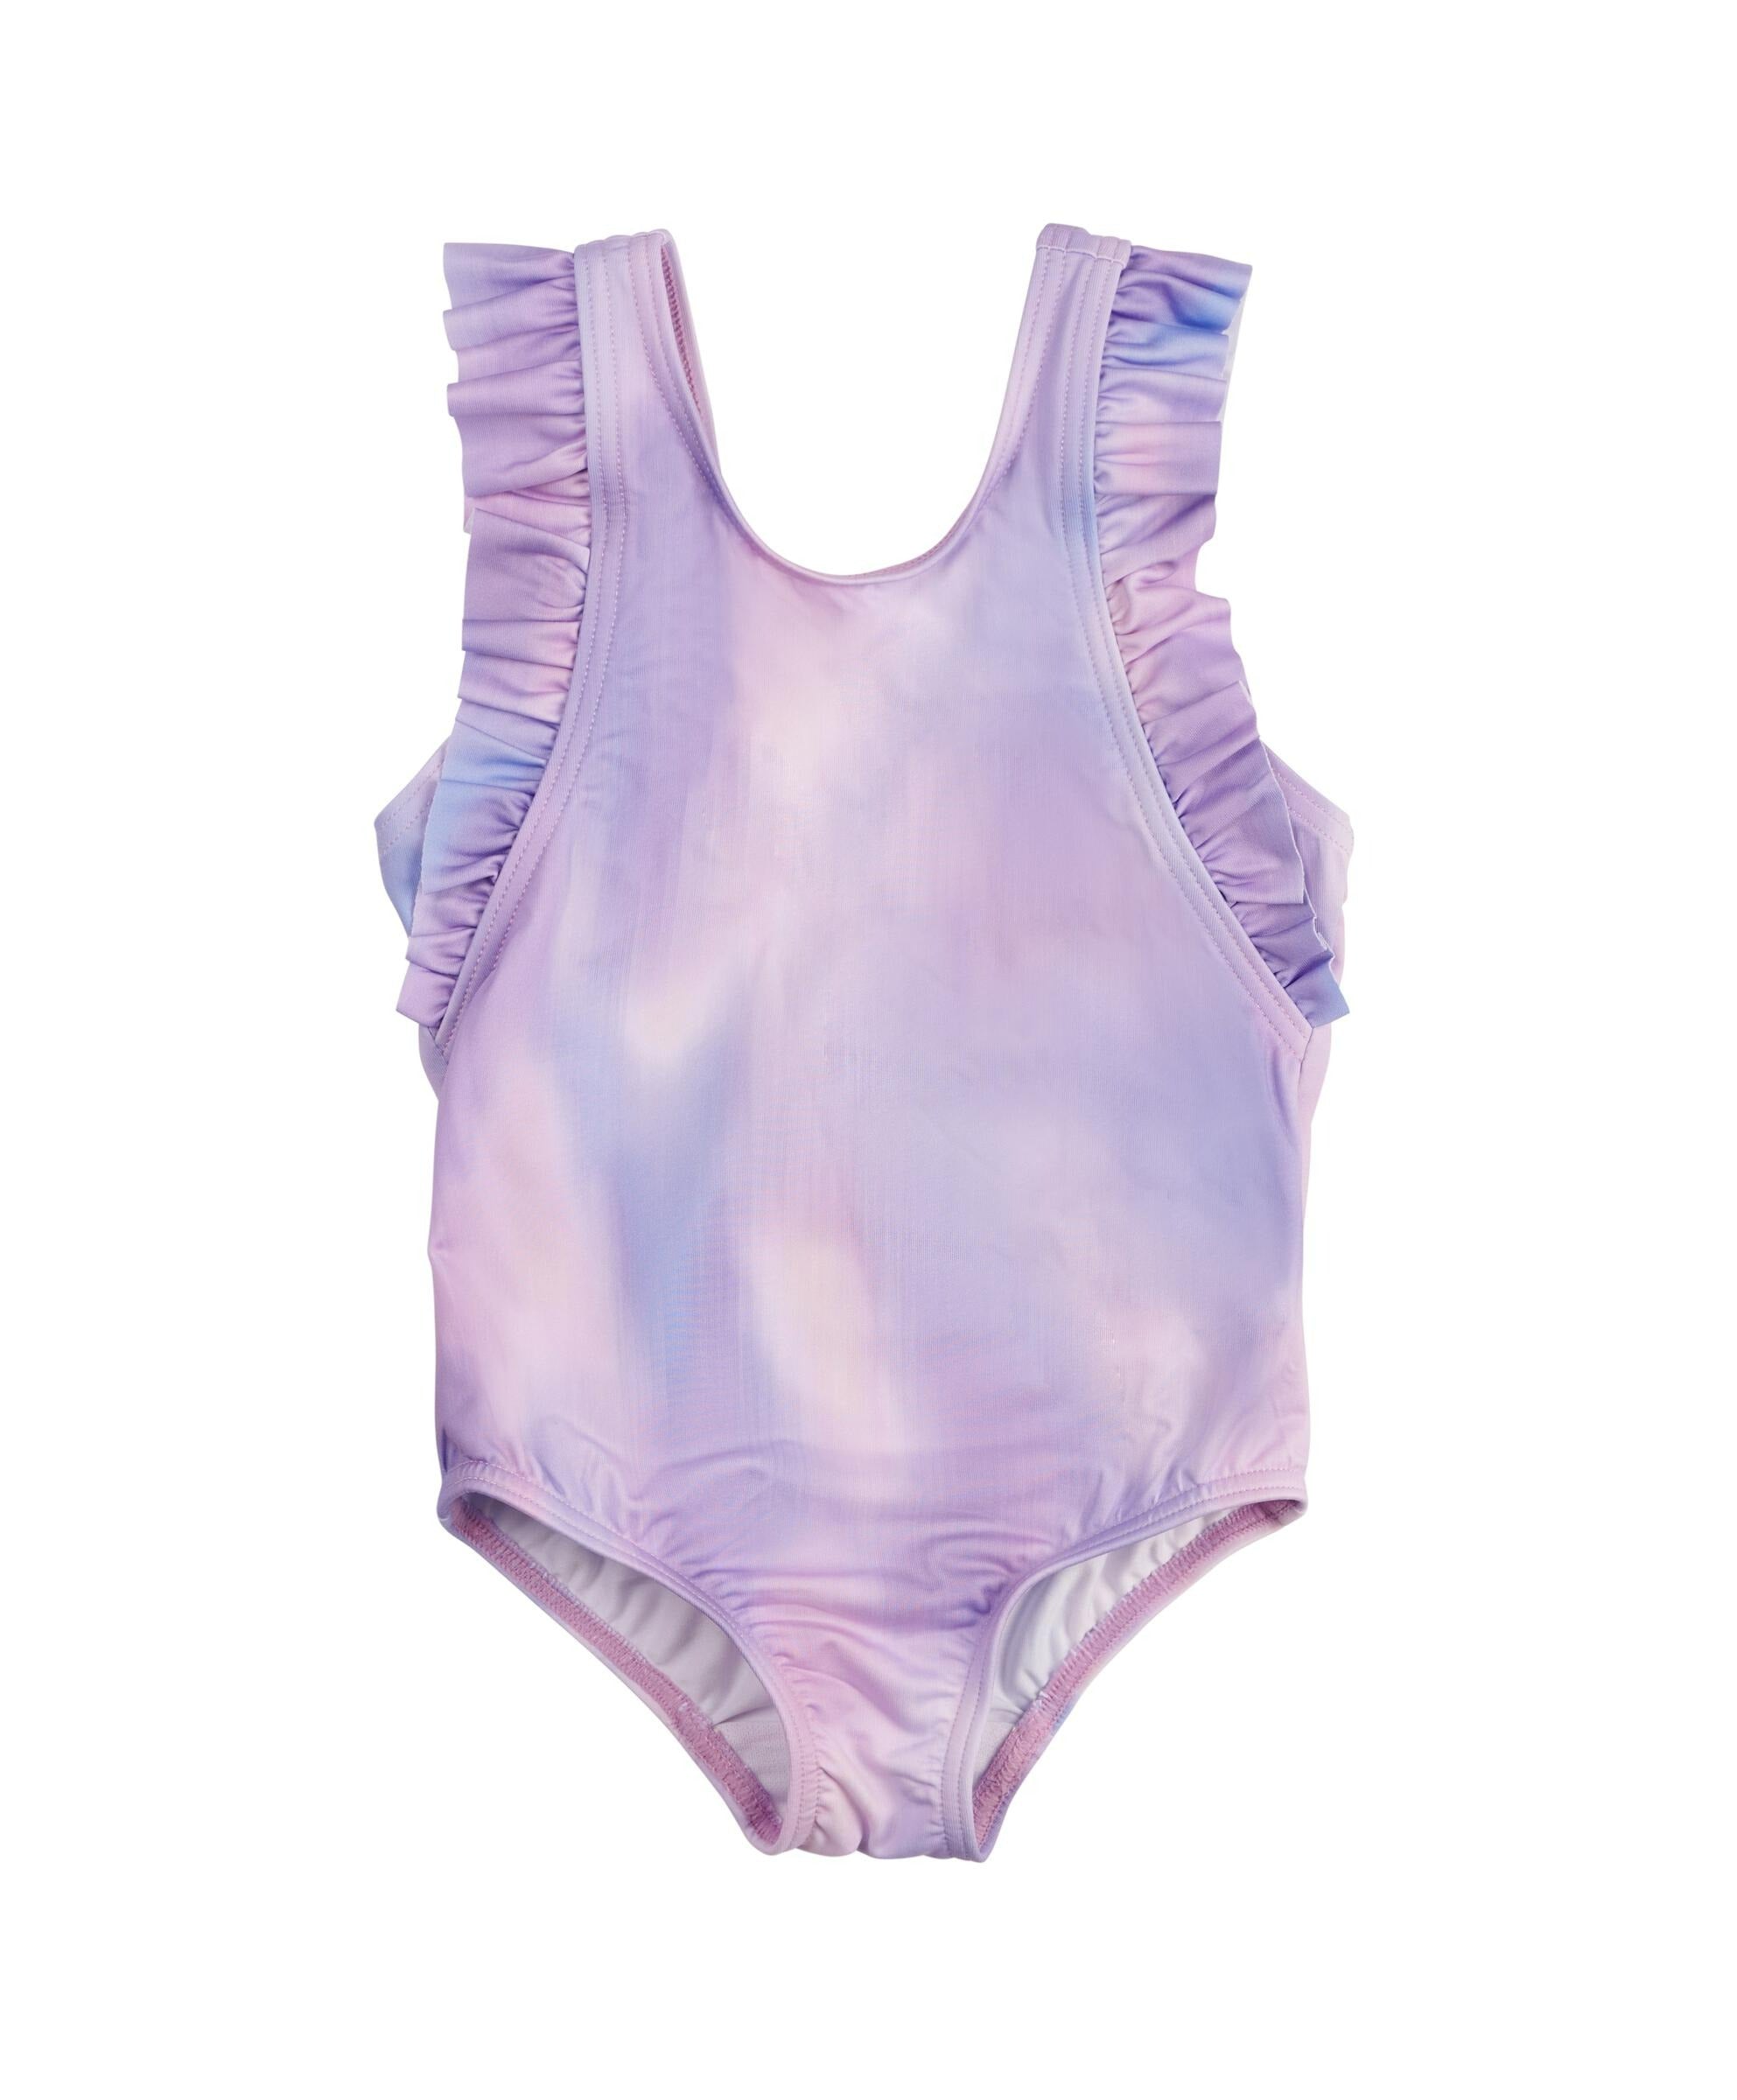 Soft Gallery Orchid Bloom Baby Girl Swimsuit